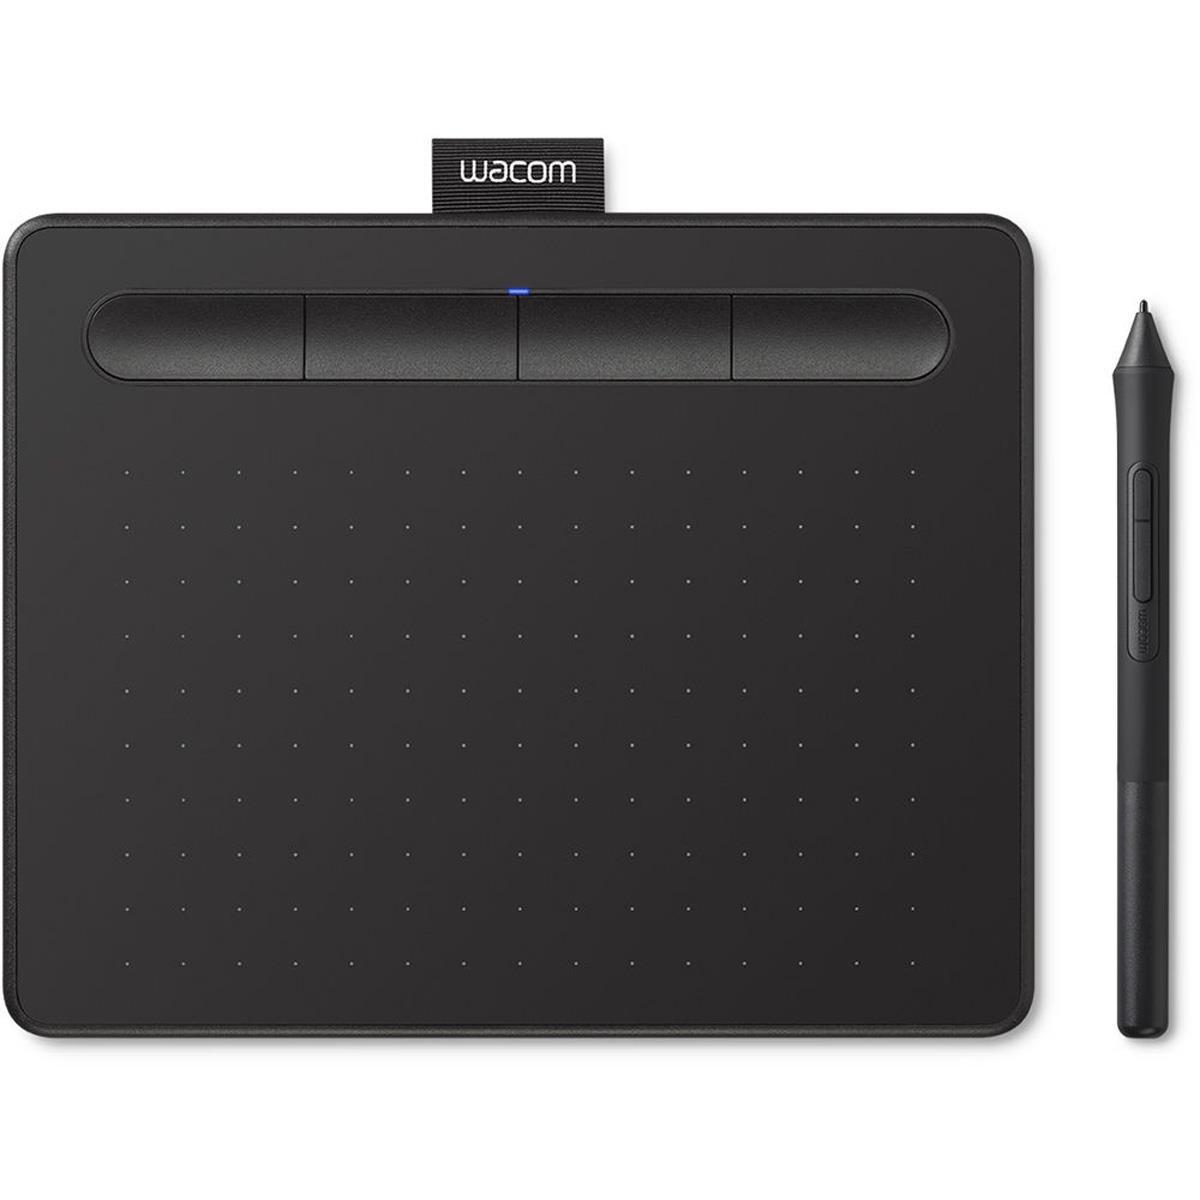 Wacom Intuos Graphics Drawing Tablet for $39.95 Shipped